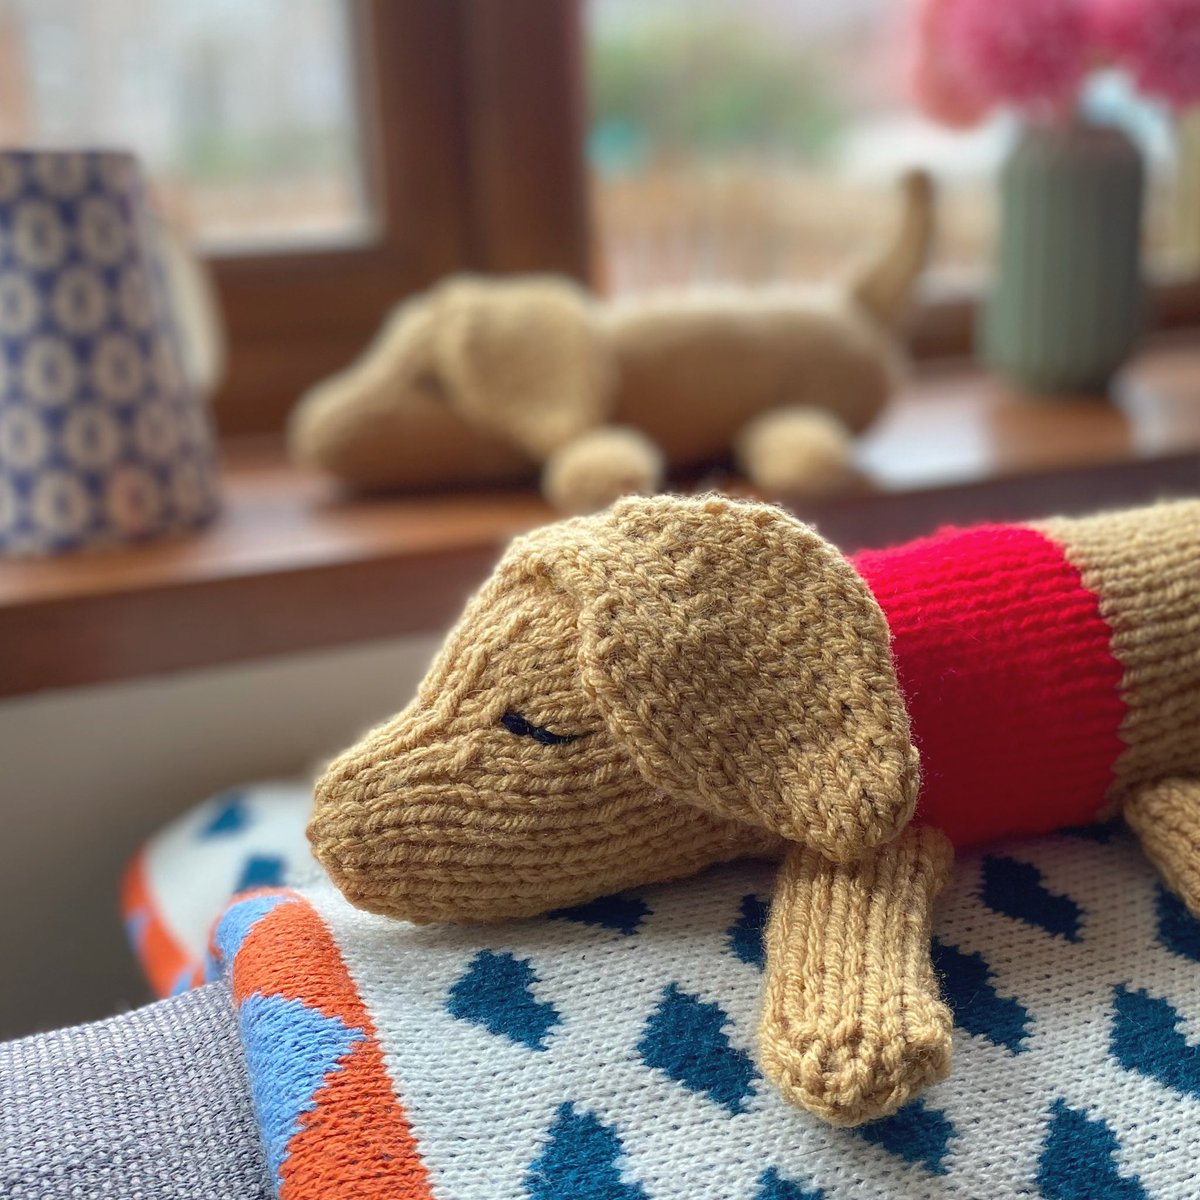 Very happy that so many people have been downloading the Sausage Dog knitting pattern recently- are there any other dog breed patterns you’d like to see? 

#notonthehighstreet #knitknitknit #loveknitting #yarn #knittersgonnaknit #knittingpatterns #knittingproject #welshbusiness